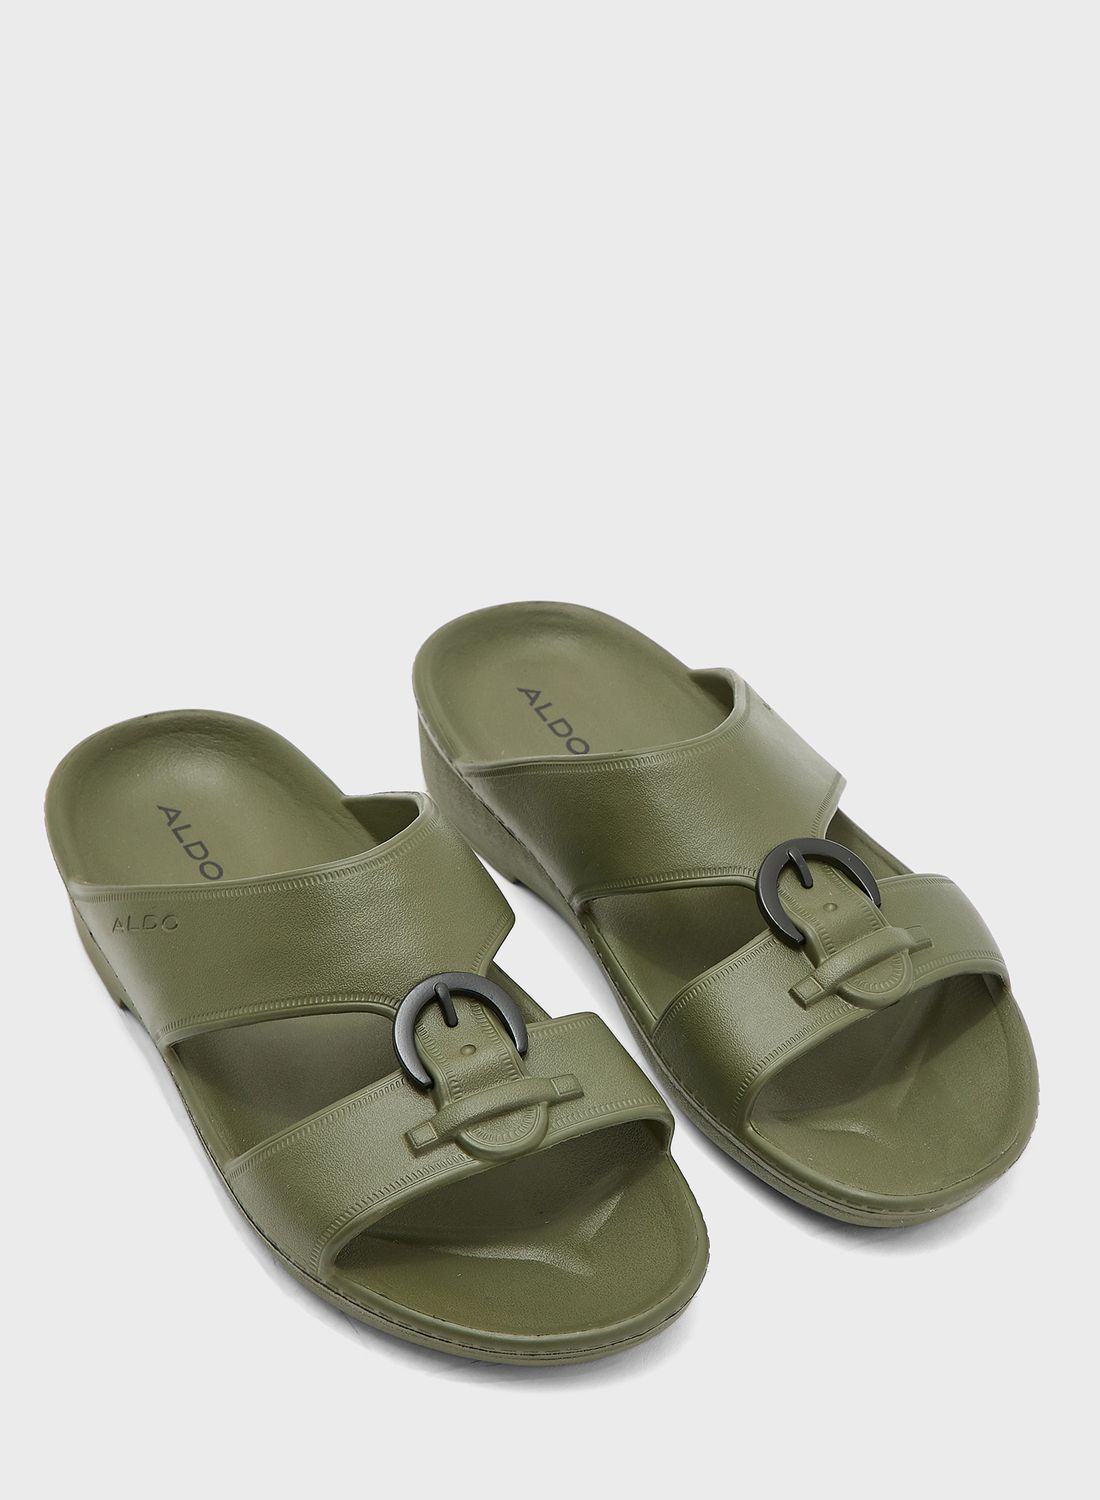 ALDO Shoes - Malaysia - Check out our Ramadhan collection of men sandals  in-stores. Receive a complimentary pack of Raya packets with any purchase*  *While stocks last. #AldoMalaysia #AldoShoes | Facebook